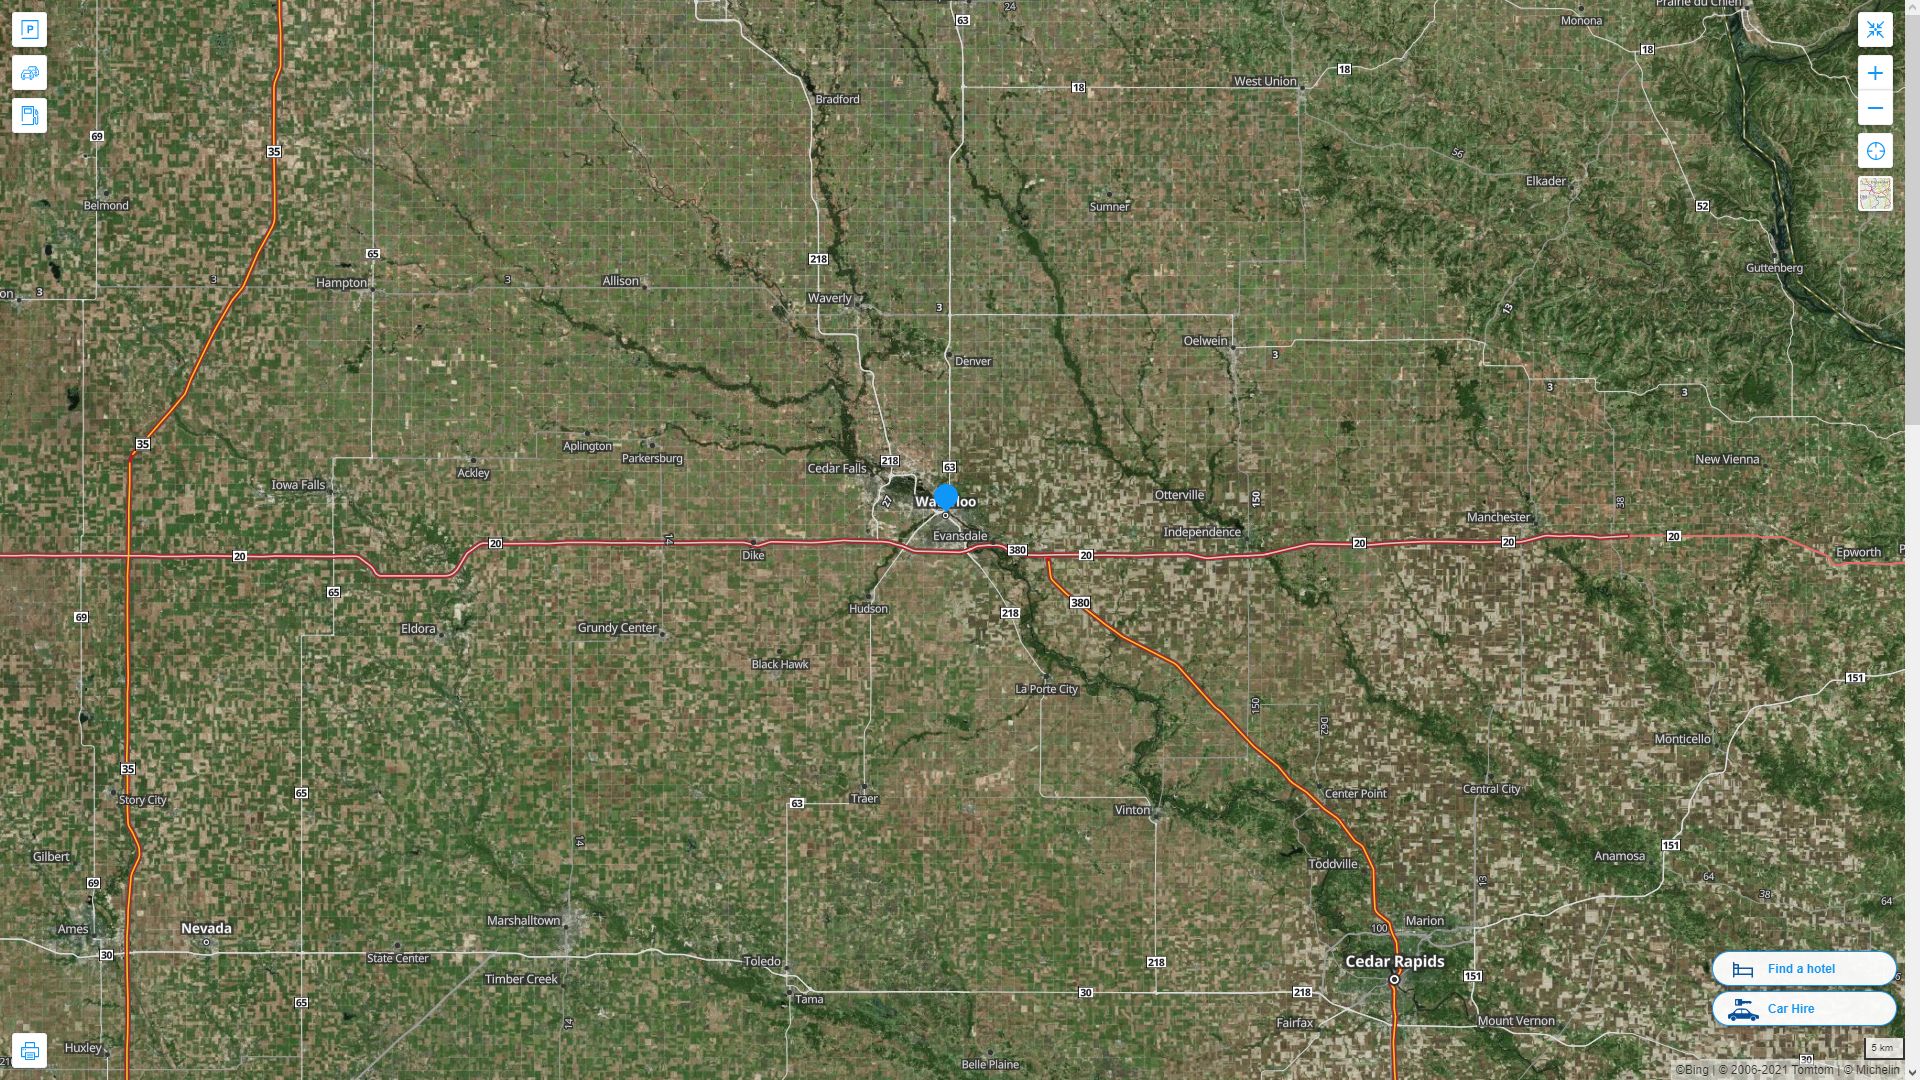 Waterloo iowa Highway and Road Map with Satellite View